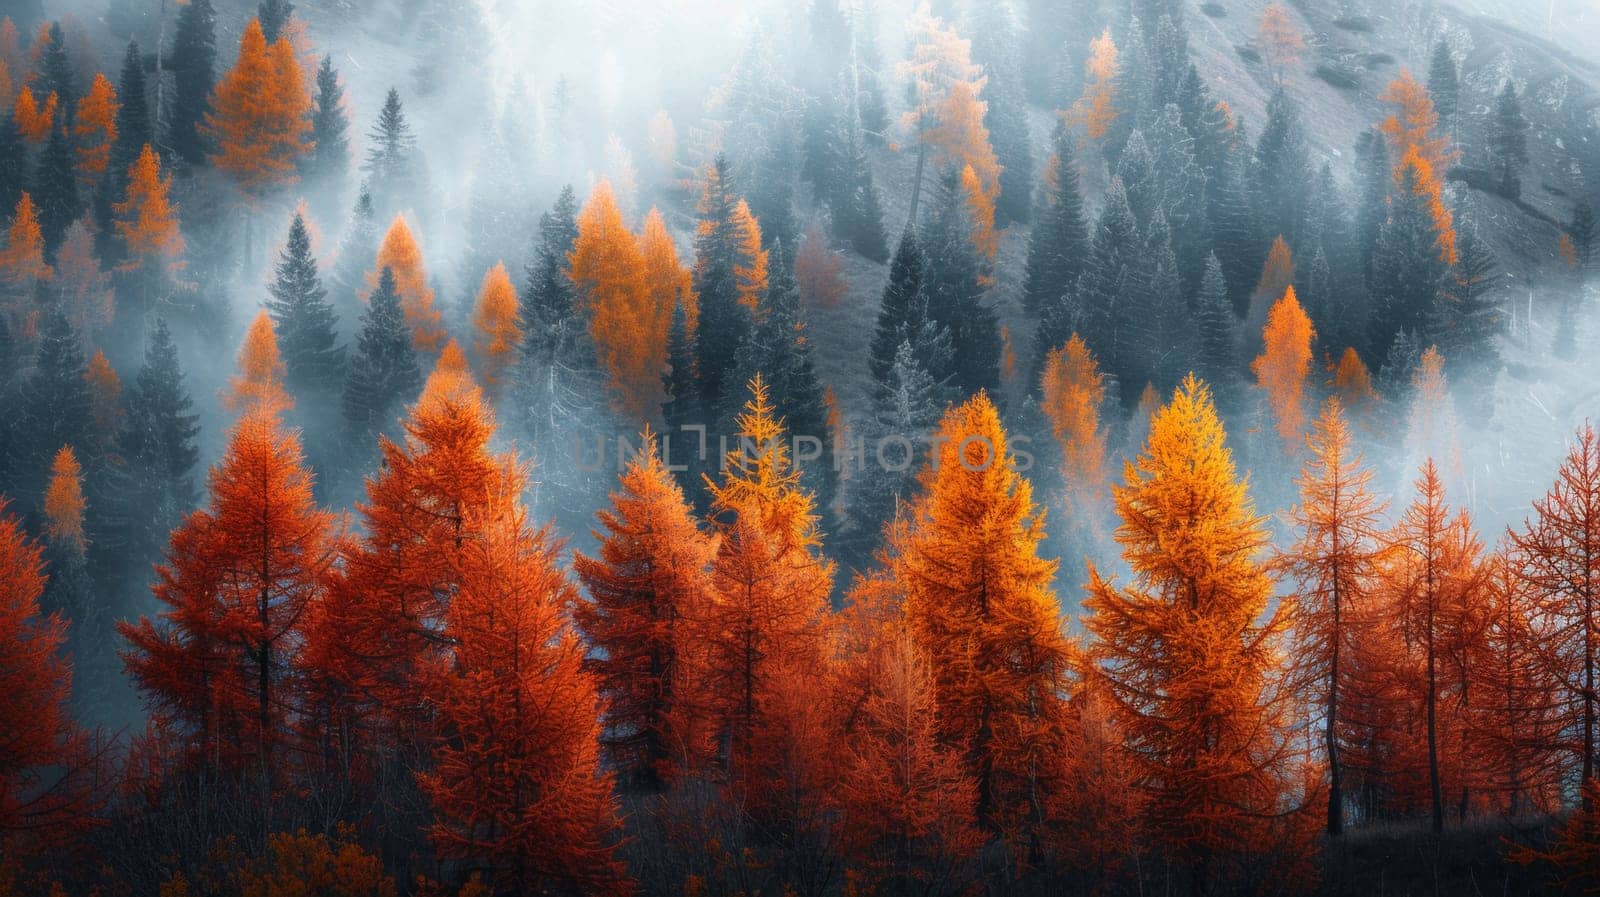 A forest of trees with orange and red leaves in the fog